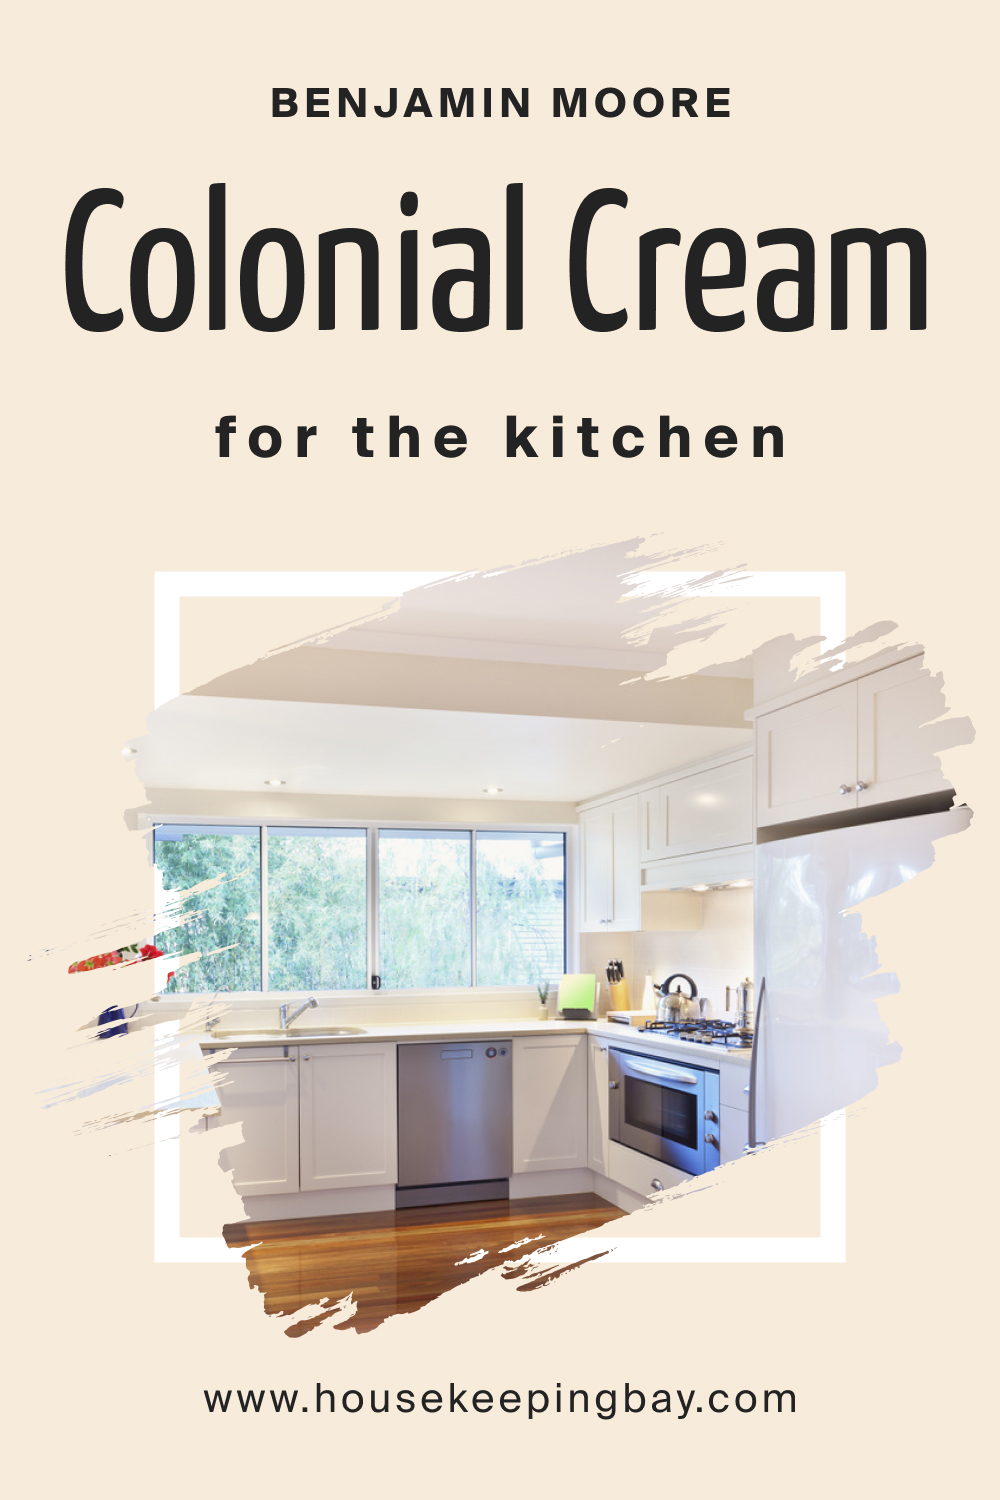 Benjamin Moore. Colonial Cream OC 77 for the Kitchen